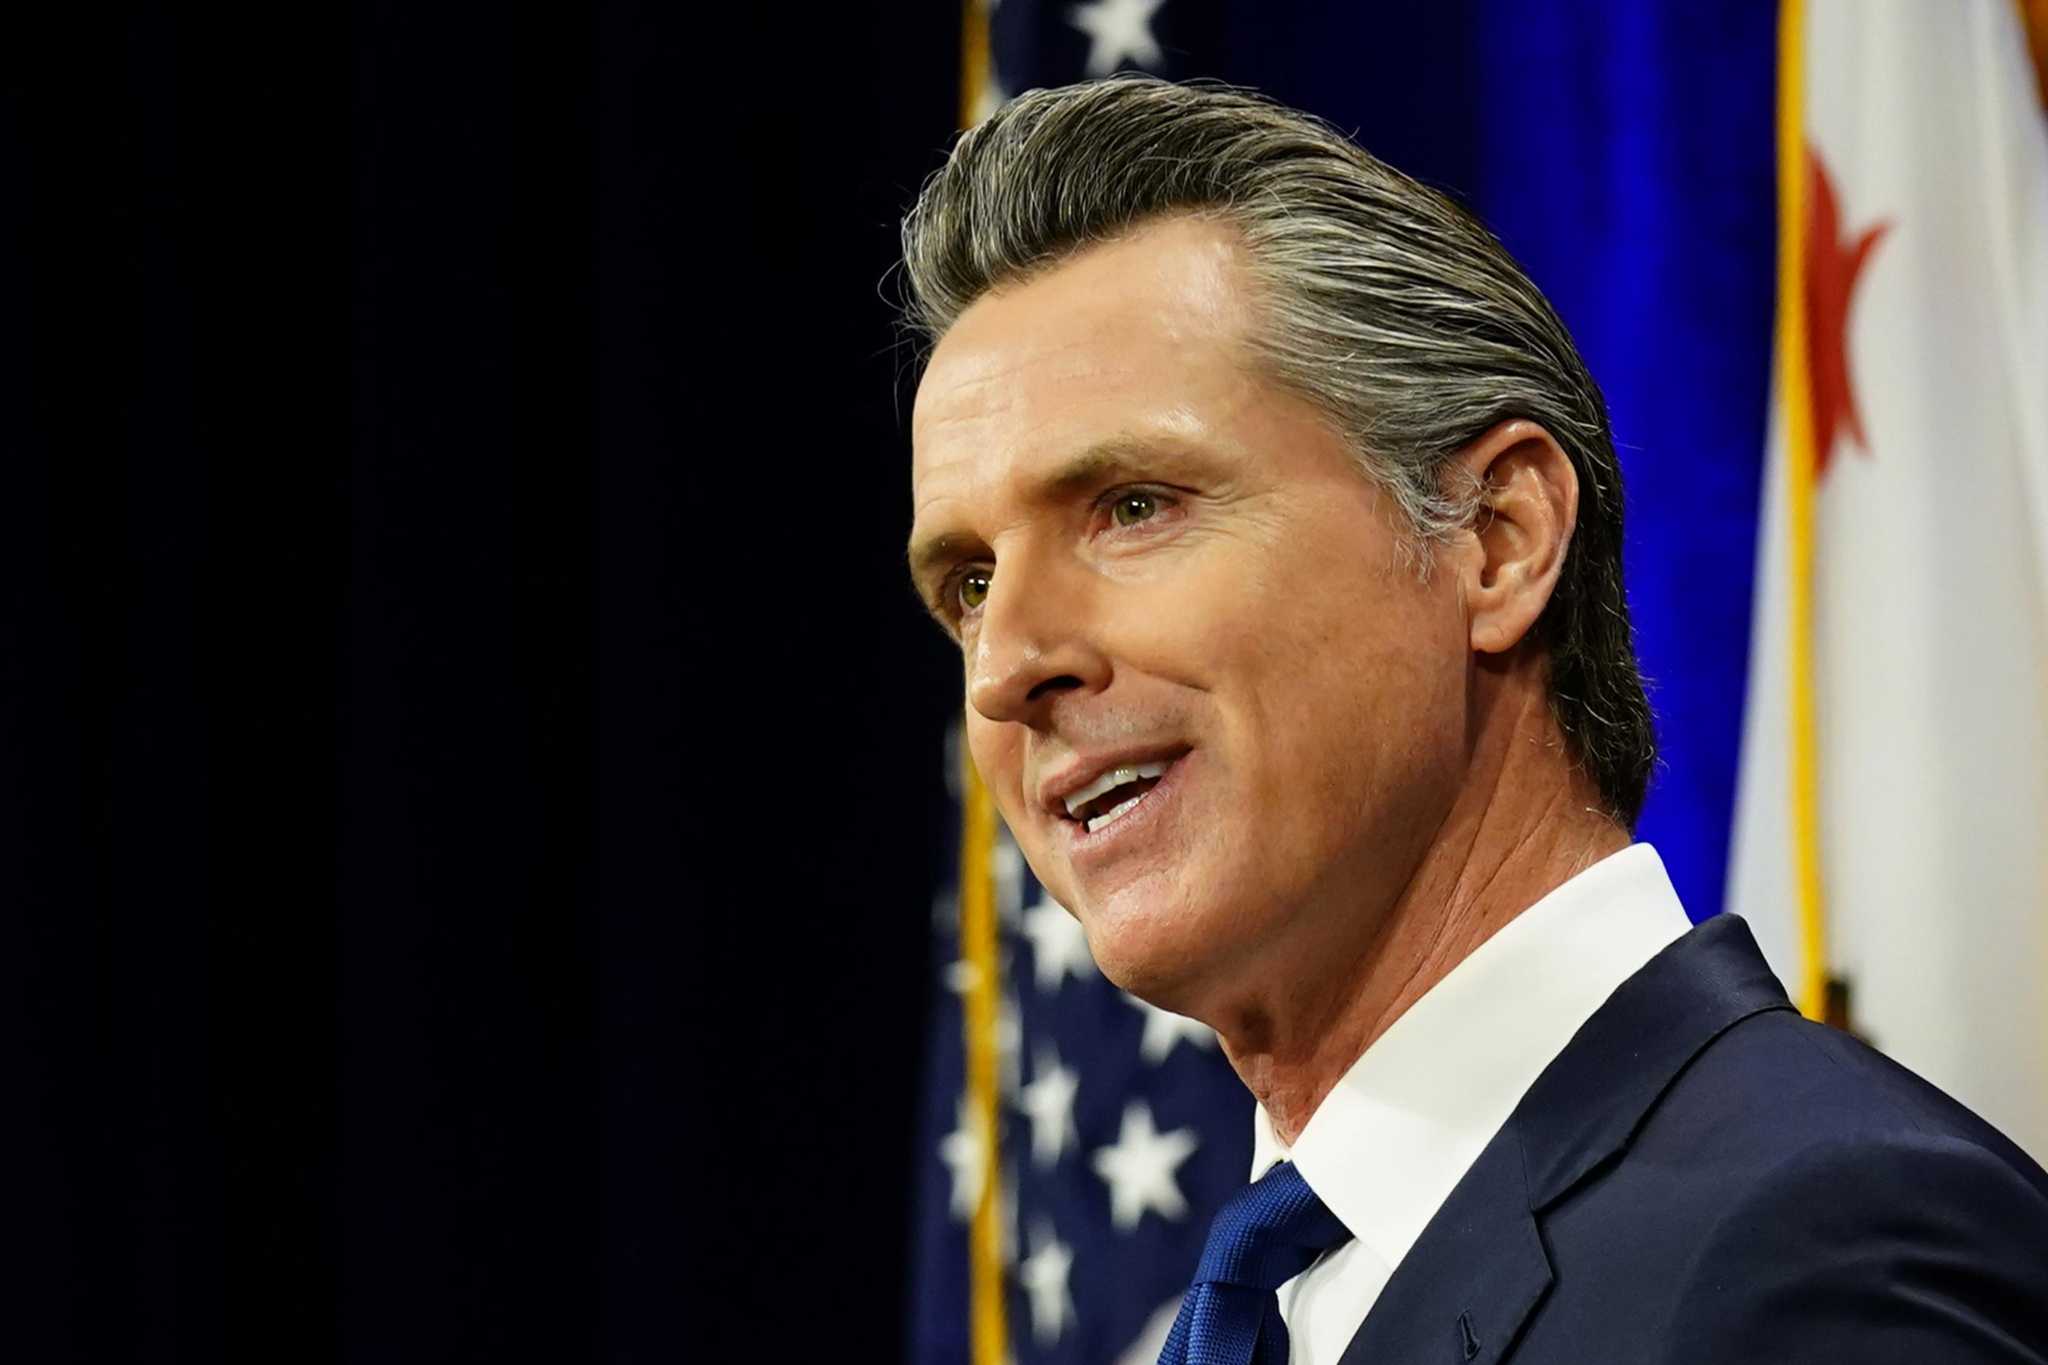 newsom-tax-returns-show-his-income-dipped-to-1-47-million-in-2020